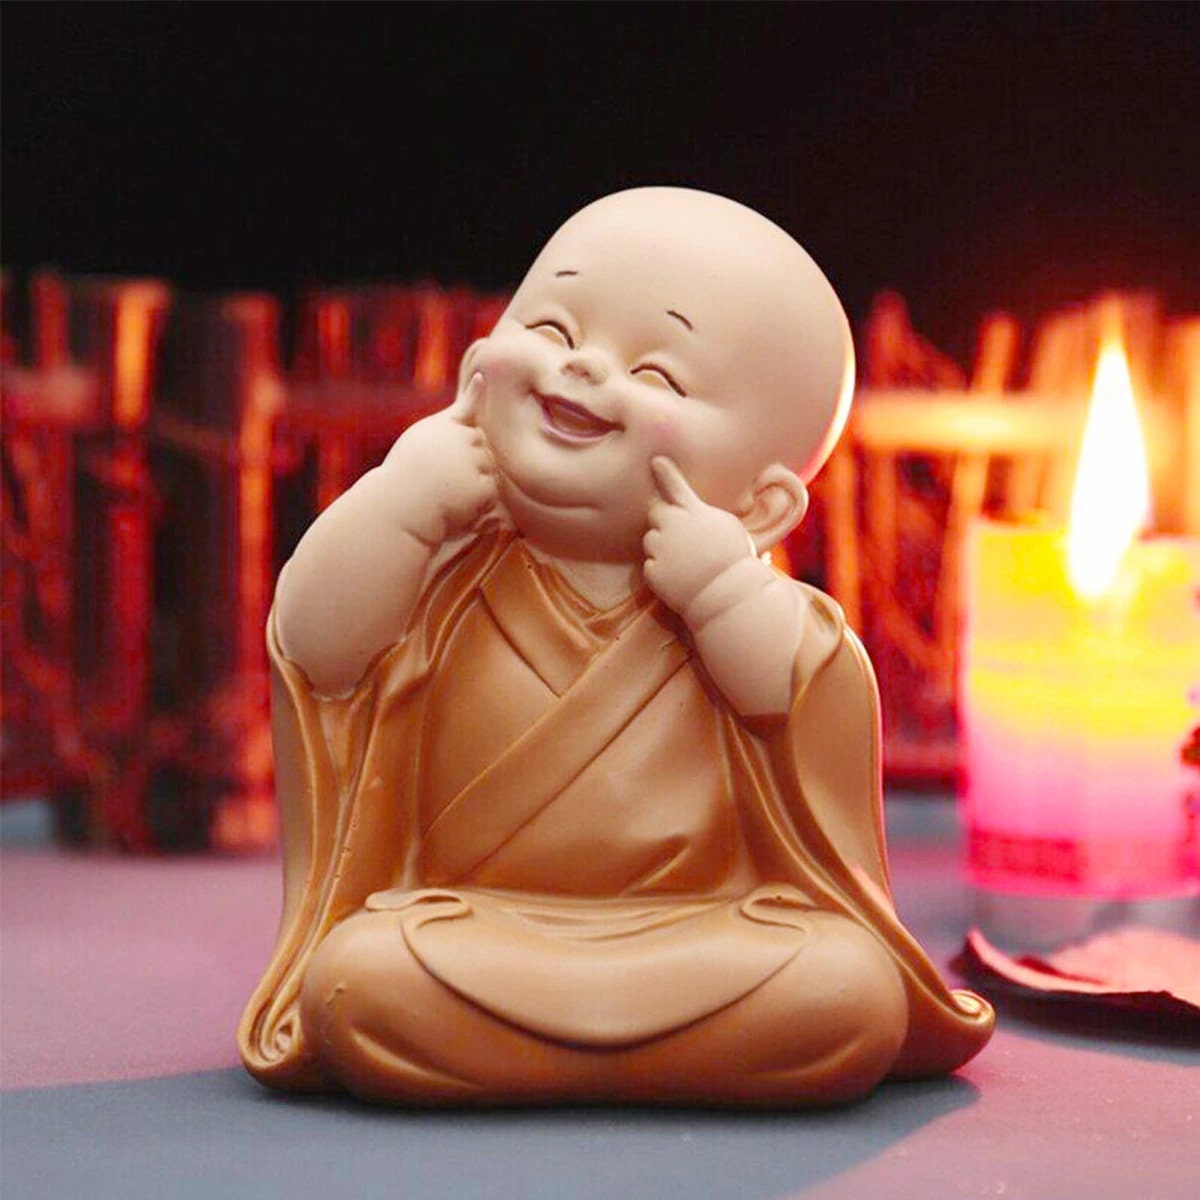 Verbetering behang Speciaal Laughing Little Monk Figurine Mini Statue Cute Buddha Adorable - Etsy